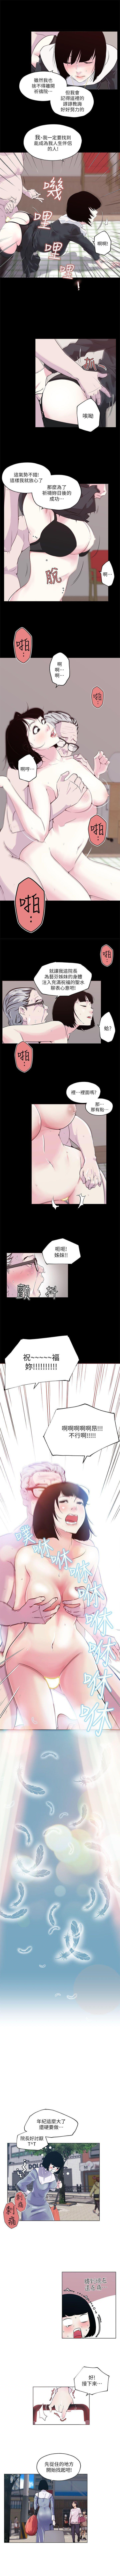 Young Old 打開她的苞 1-12 Bath - Page 4